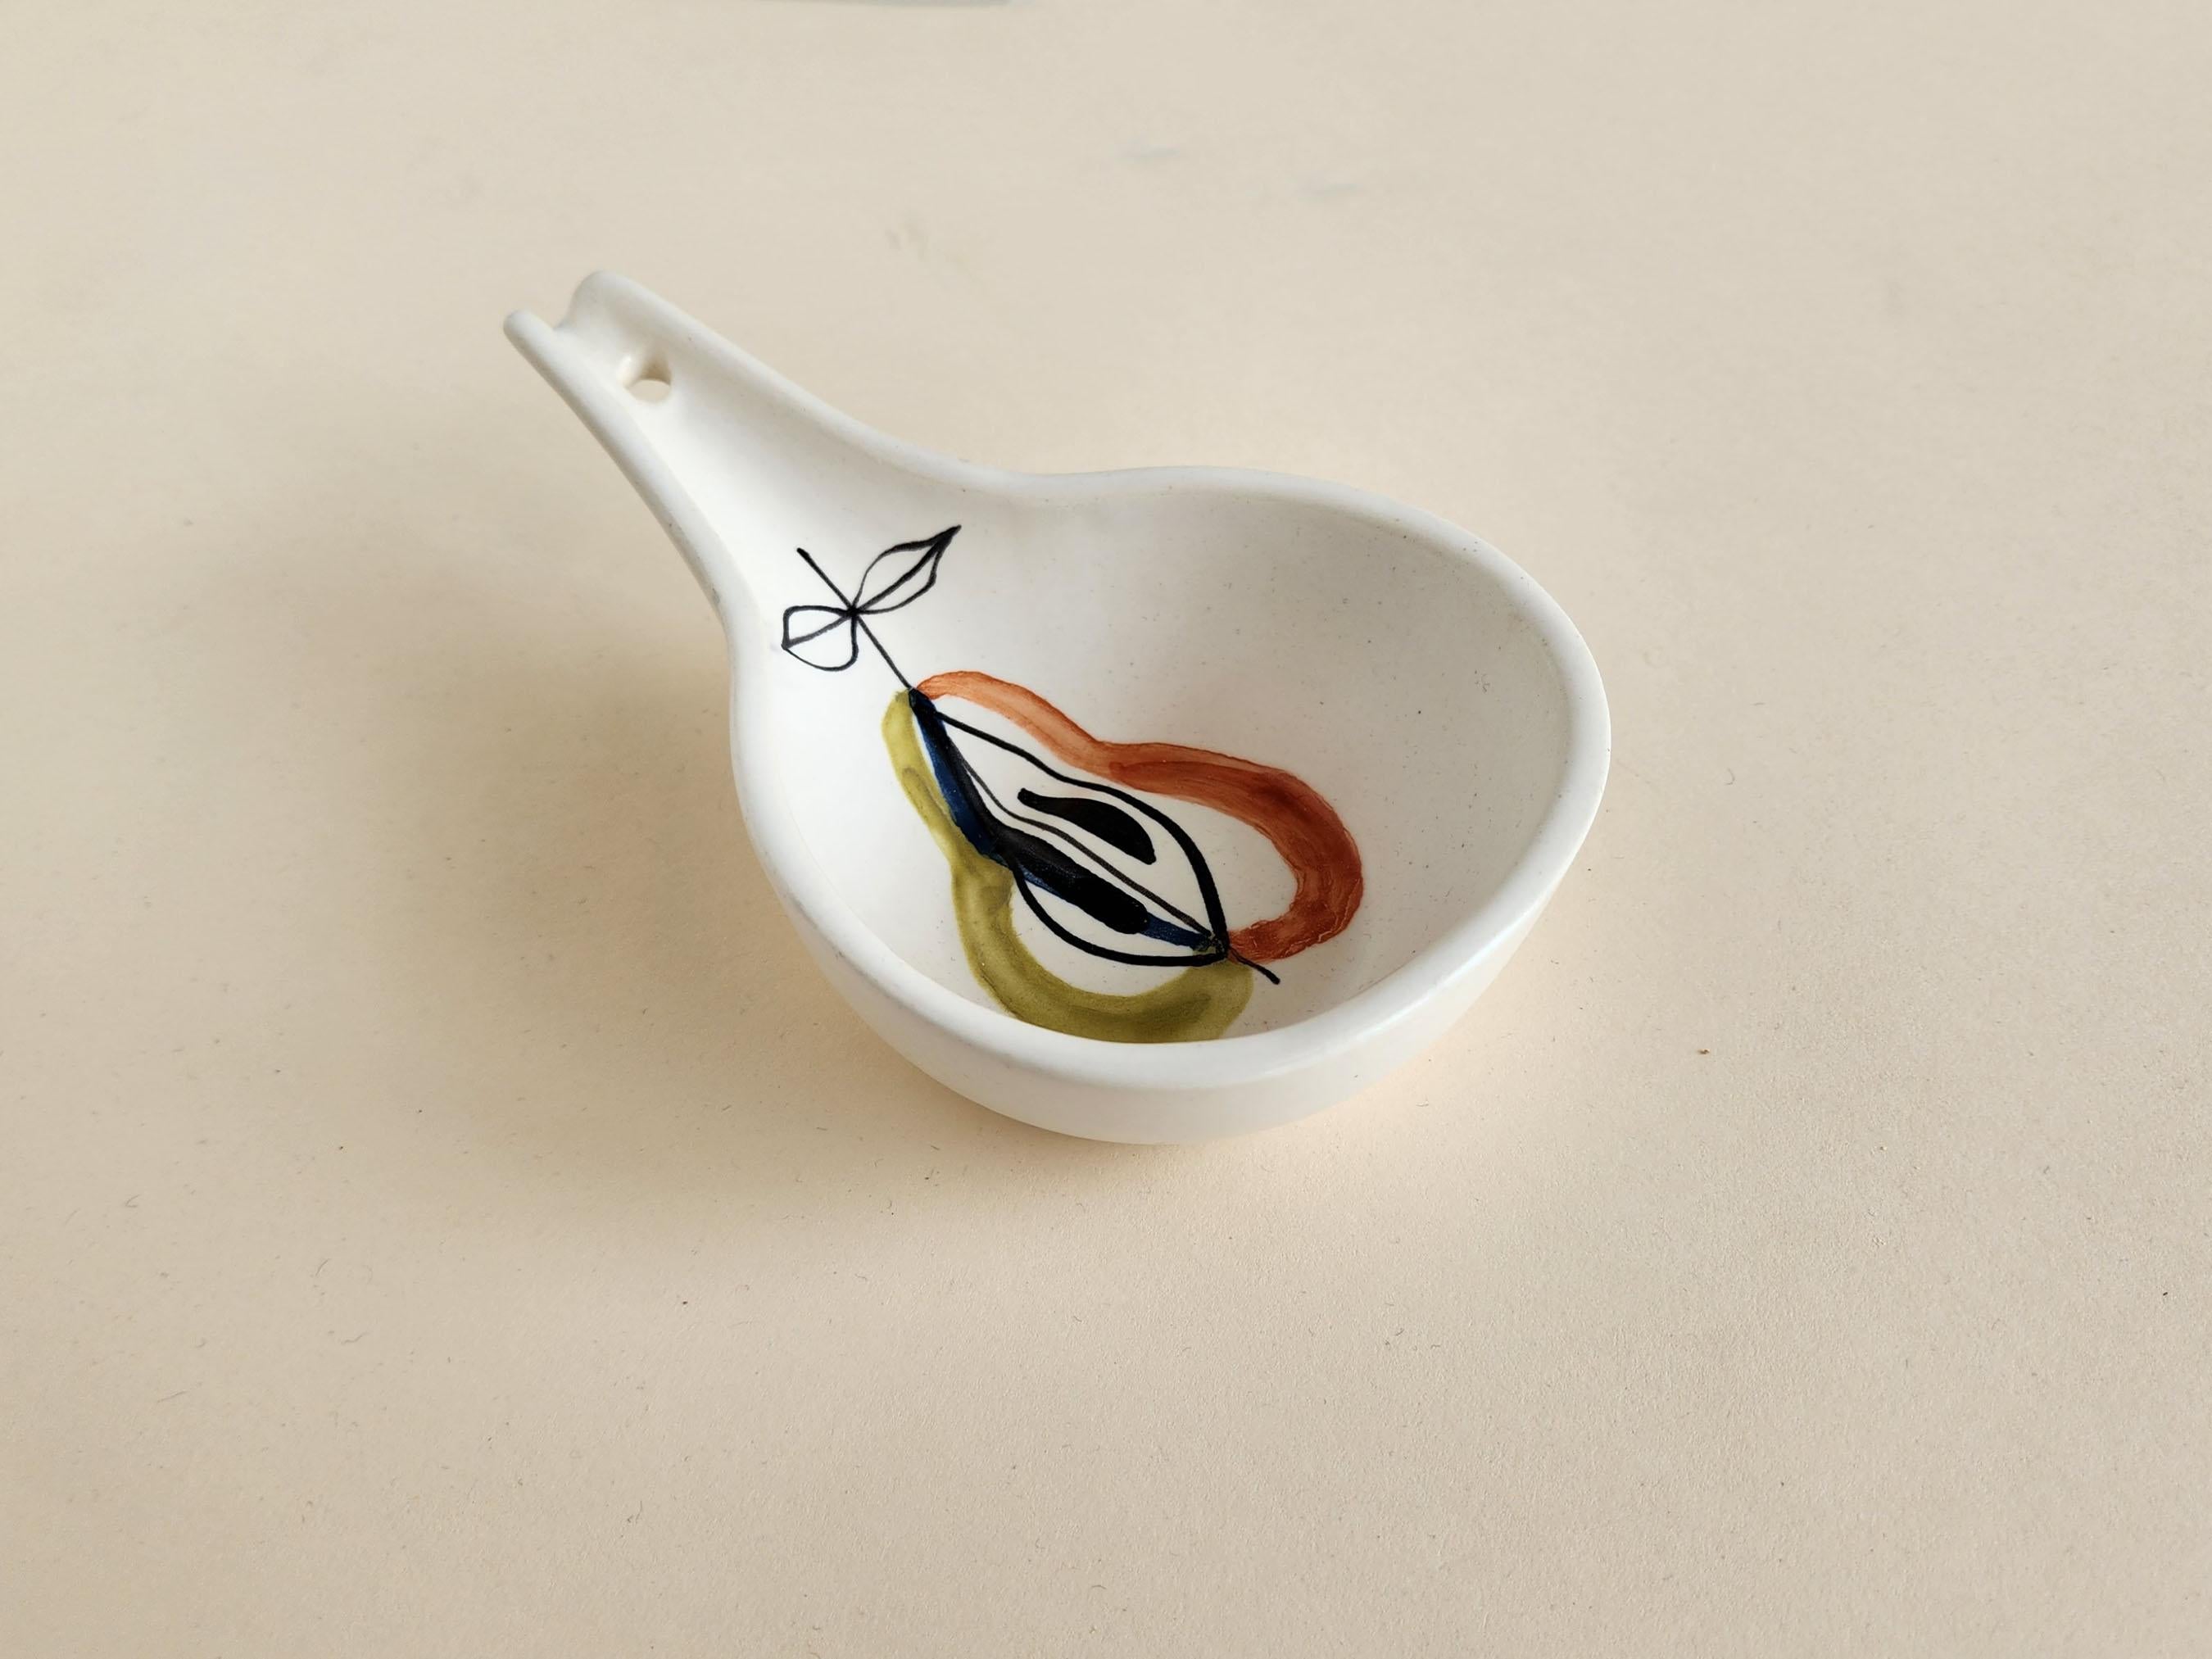 Vintage ceramic spoon rest signed by Roger Capron - Vallauris, France

Roger Capron was in influential French ceramicist, known for his tiled tables and his use of recurring motifs such as stylized branches and geometrical suns.   He was born in